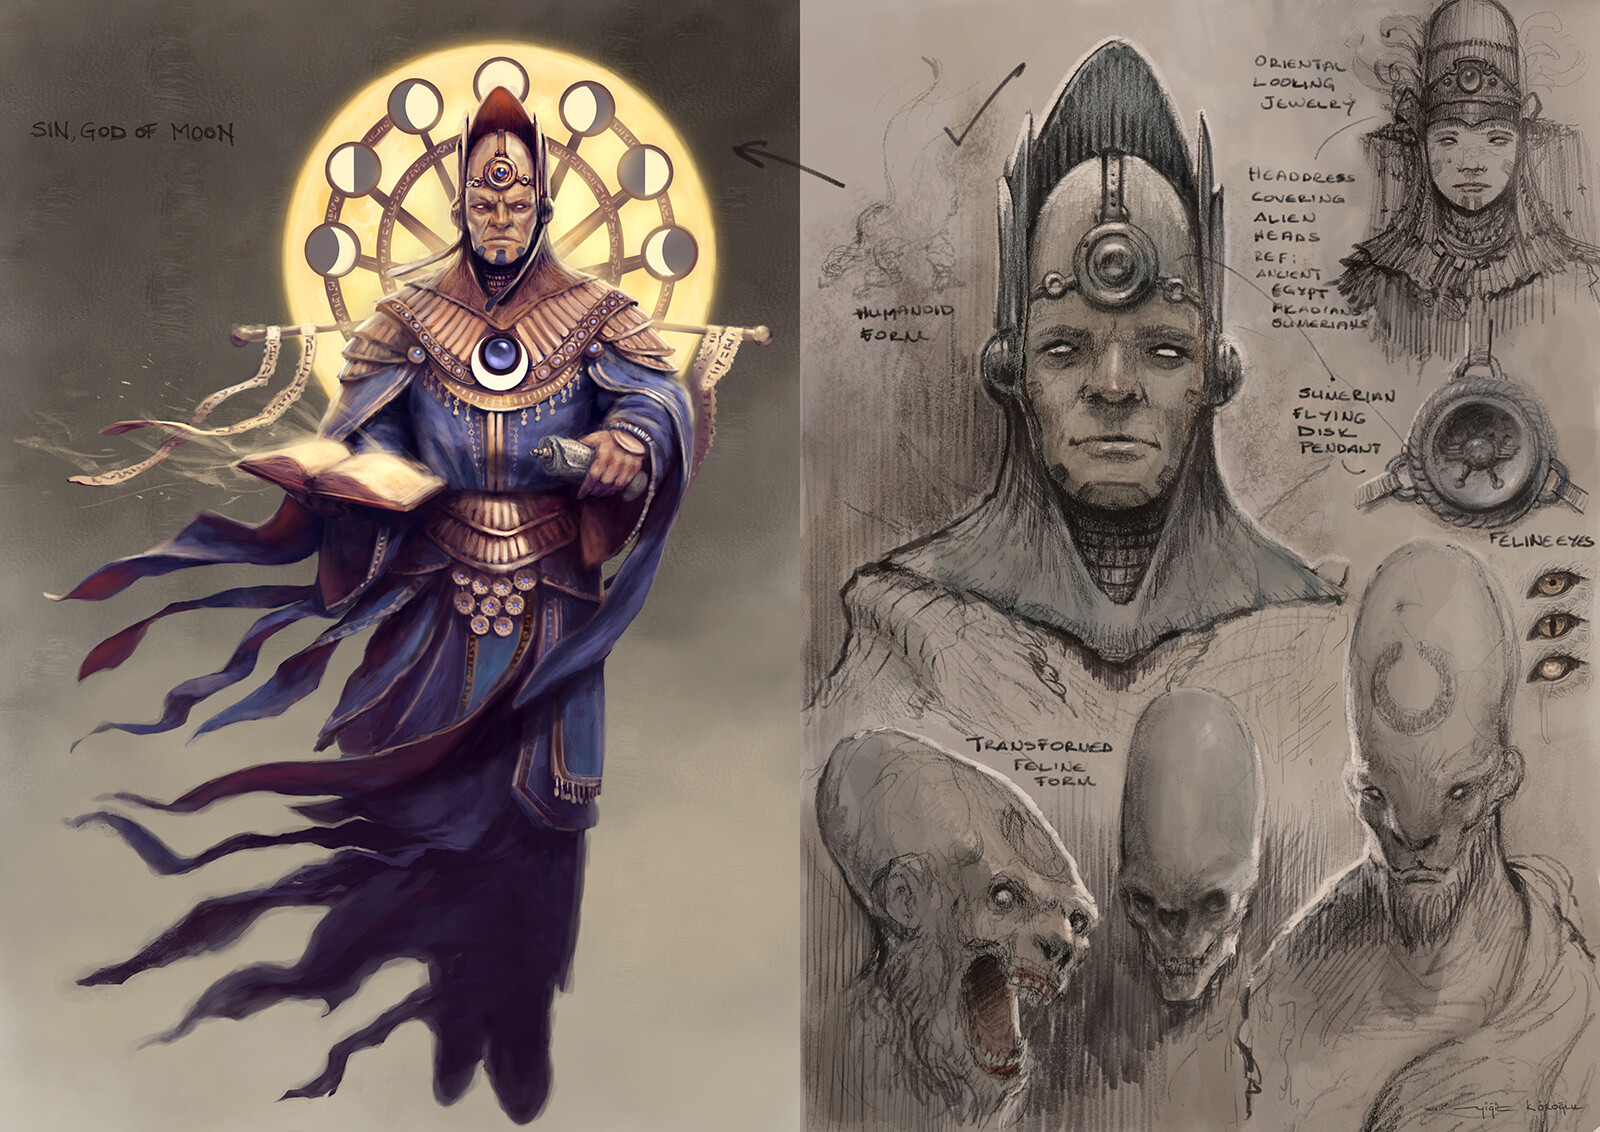 Sin, god of moon. In the sketch, i was exploring some kind of alien race for the setting, and i decided to carry the egg shaped heads to the next level. Maybe the reason we see all those tall headgear in Mesopotamian art was to hide the unusual heads.